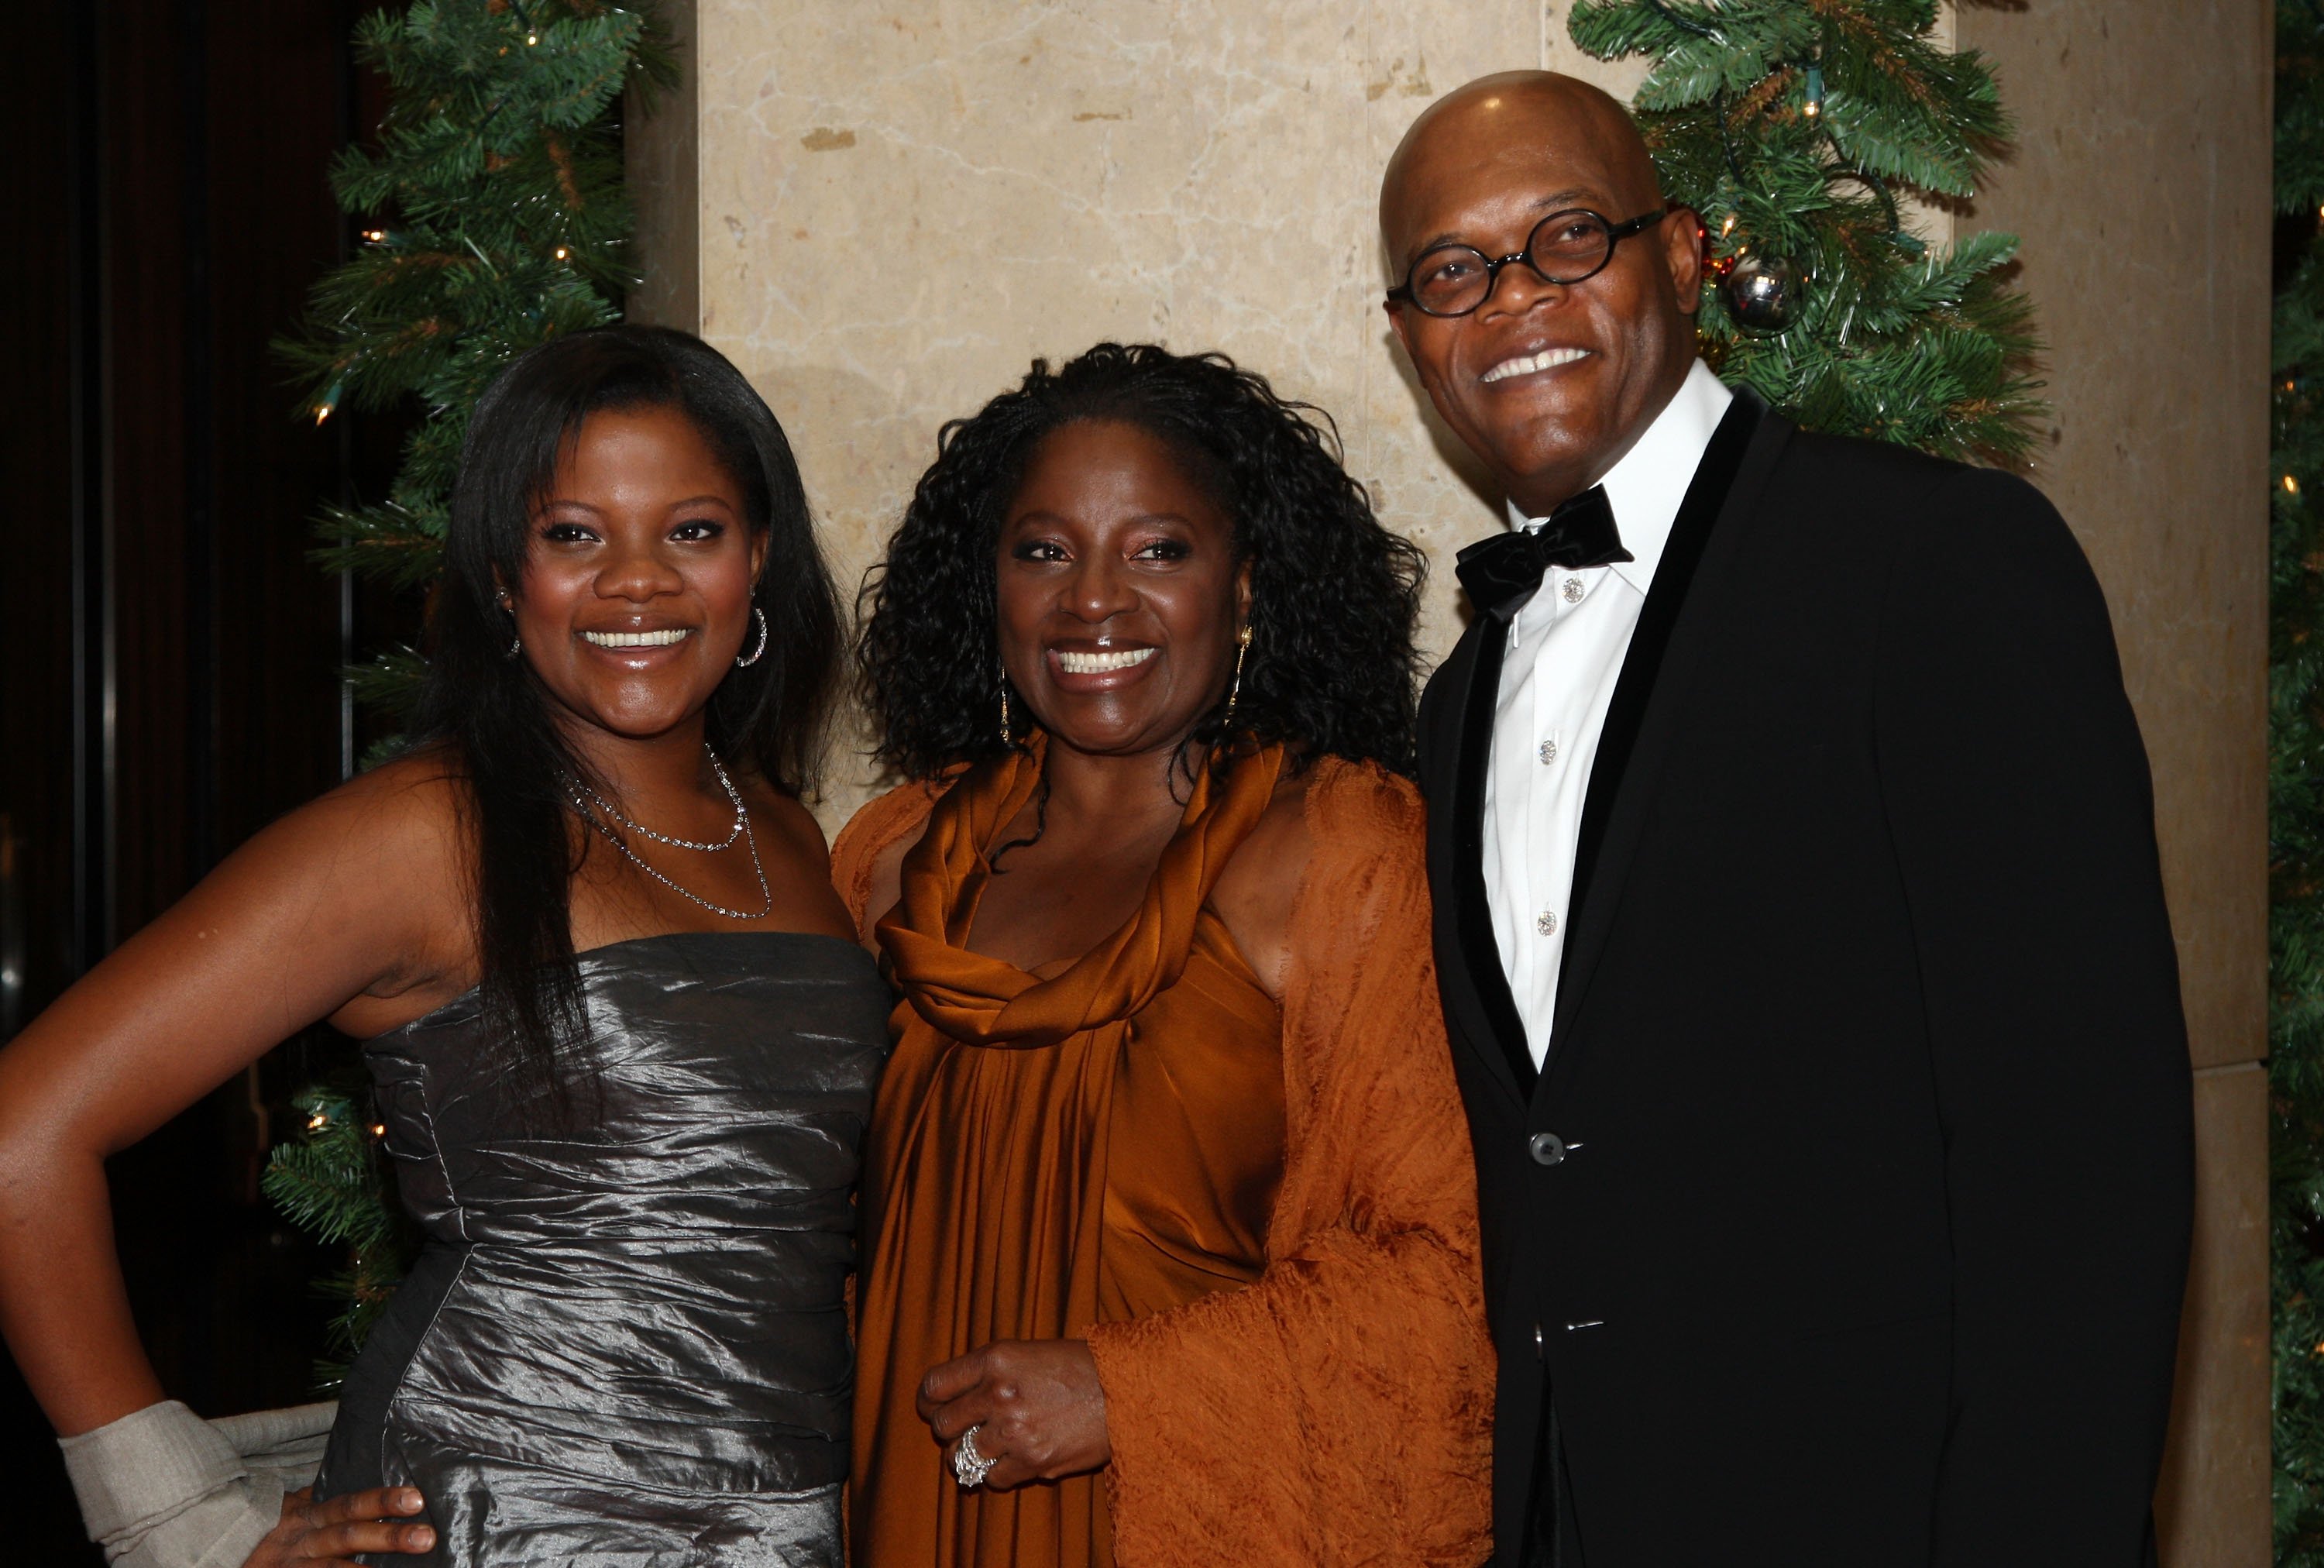 Samuel L. Jackson (far R), LaTanya Richardson (C) & daughter Zoe Jackson at the 23rd annual American Cinematheque show on Dec. 1, 2008 in Beverly Hills | Photo: Getty Images